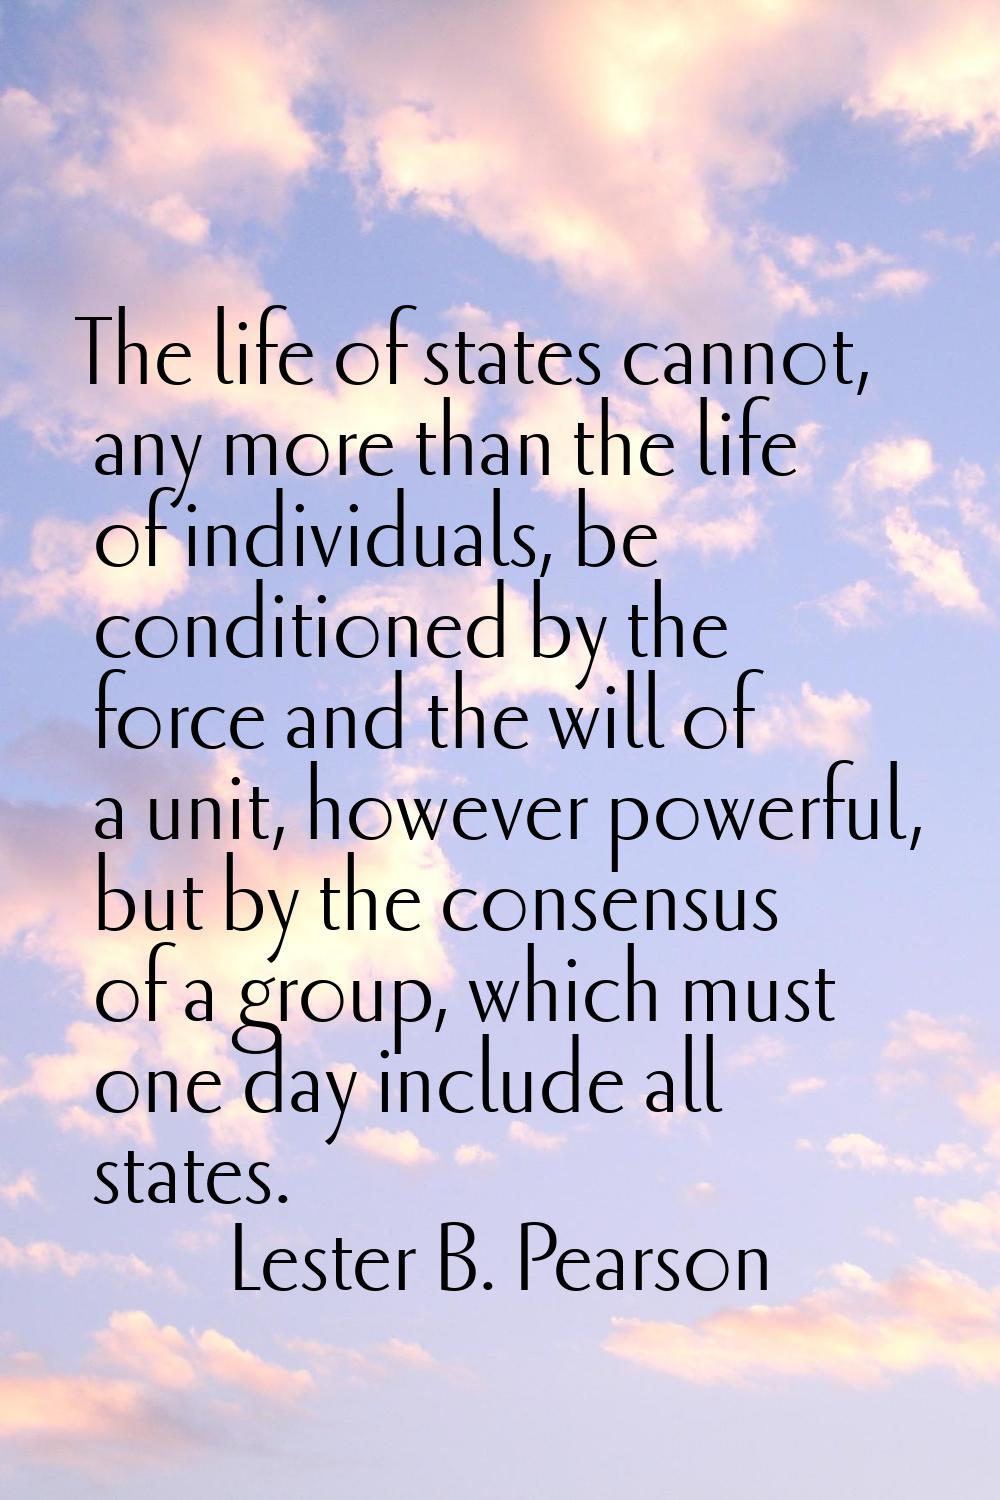 The life of states cannot, any more than the life of individuals, be conditioned by the force and t